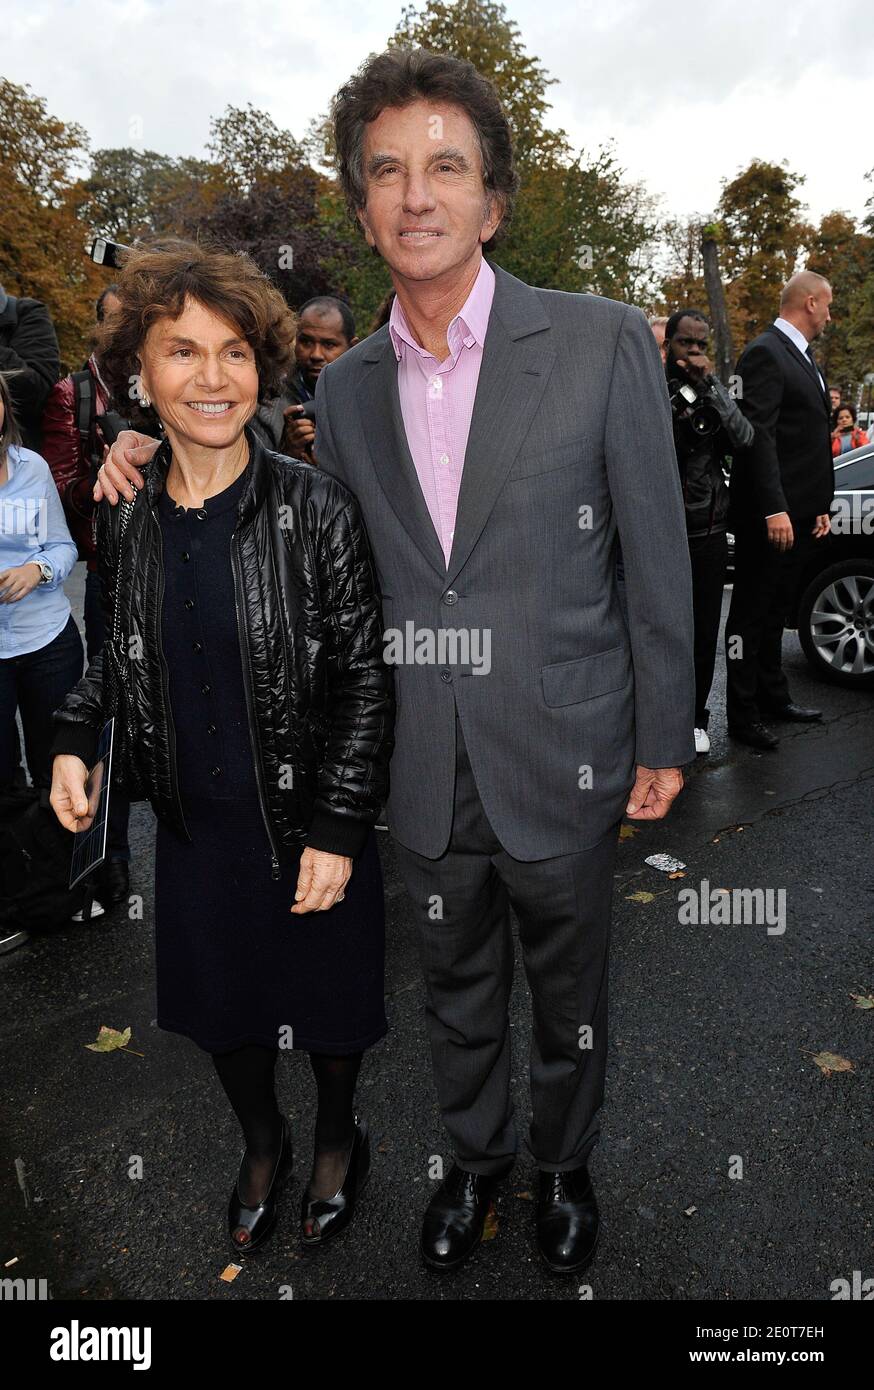 Peter Marino, former Culture minister Jack Lang and his wife Monique attend  the Chanel collection presentation as part of the Haute-Couture Fall-Winter  2014-2015 fashion week, at the Grand Palais in Paris, France